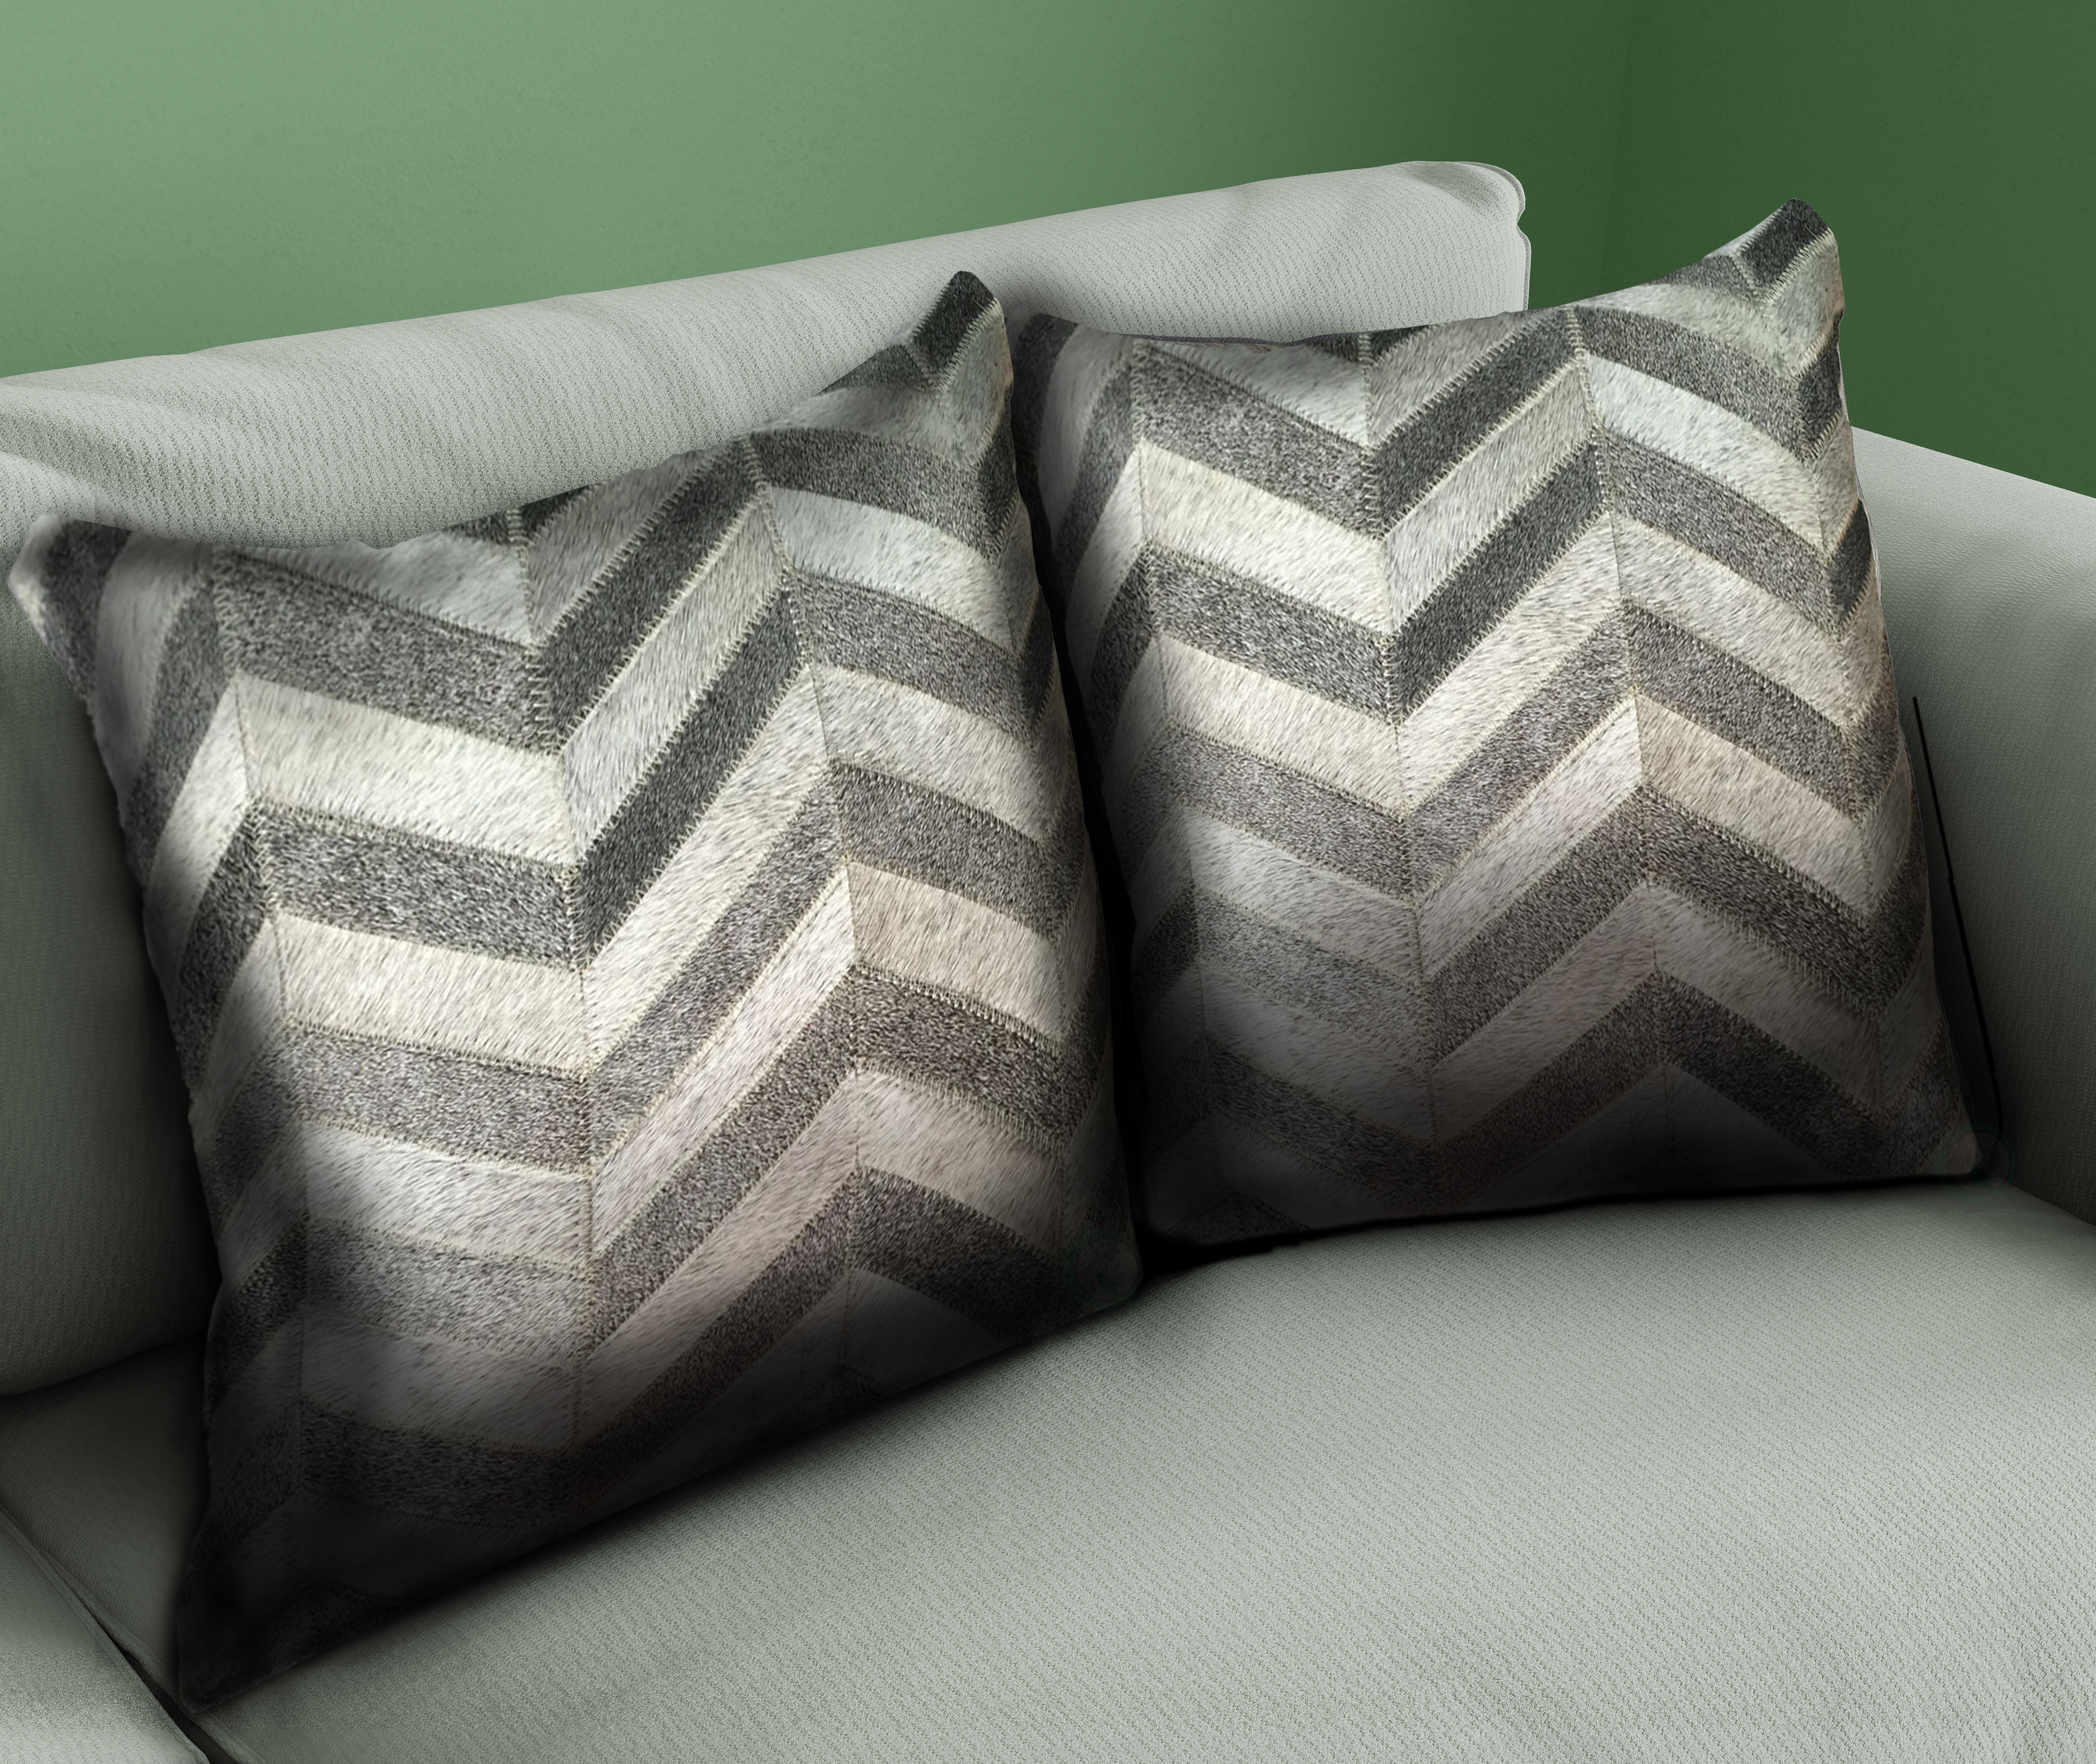 16 in. Brazilian Genuine Natural Leather High Quality Real Hair On Double Sided Cowhide Throw Pillow, Gray Chevron Design